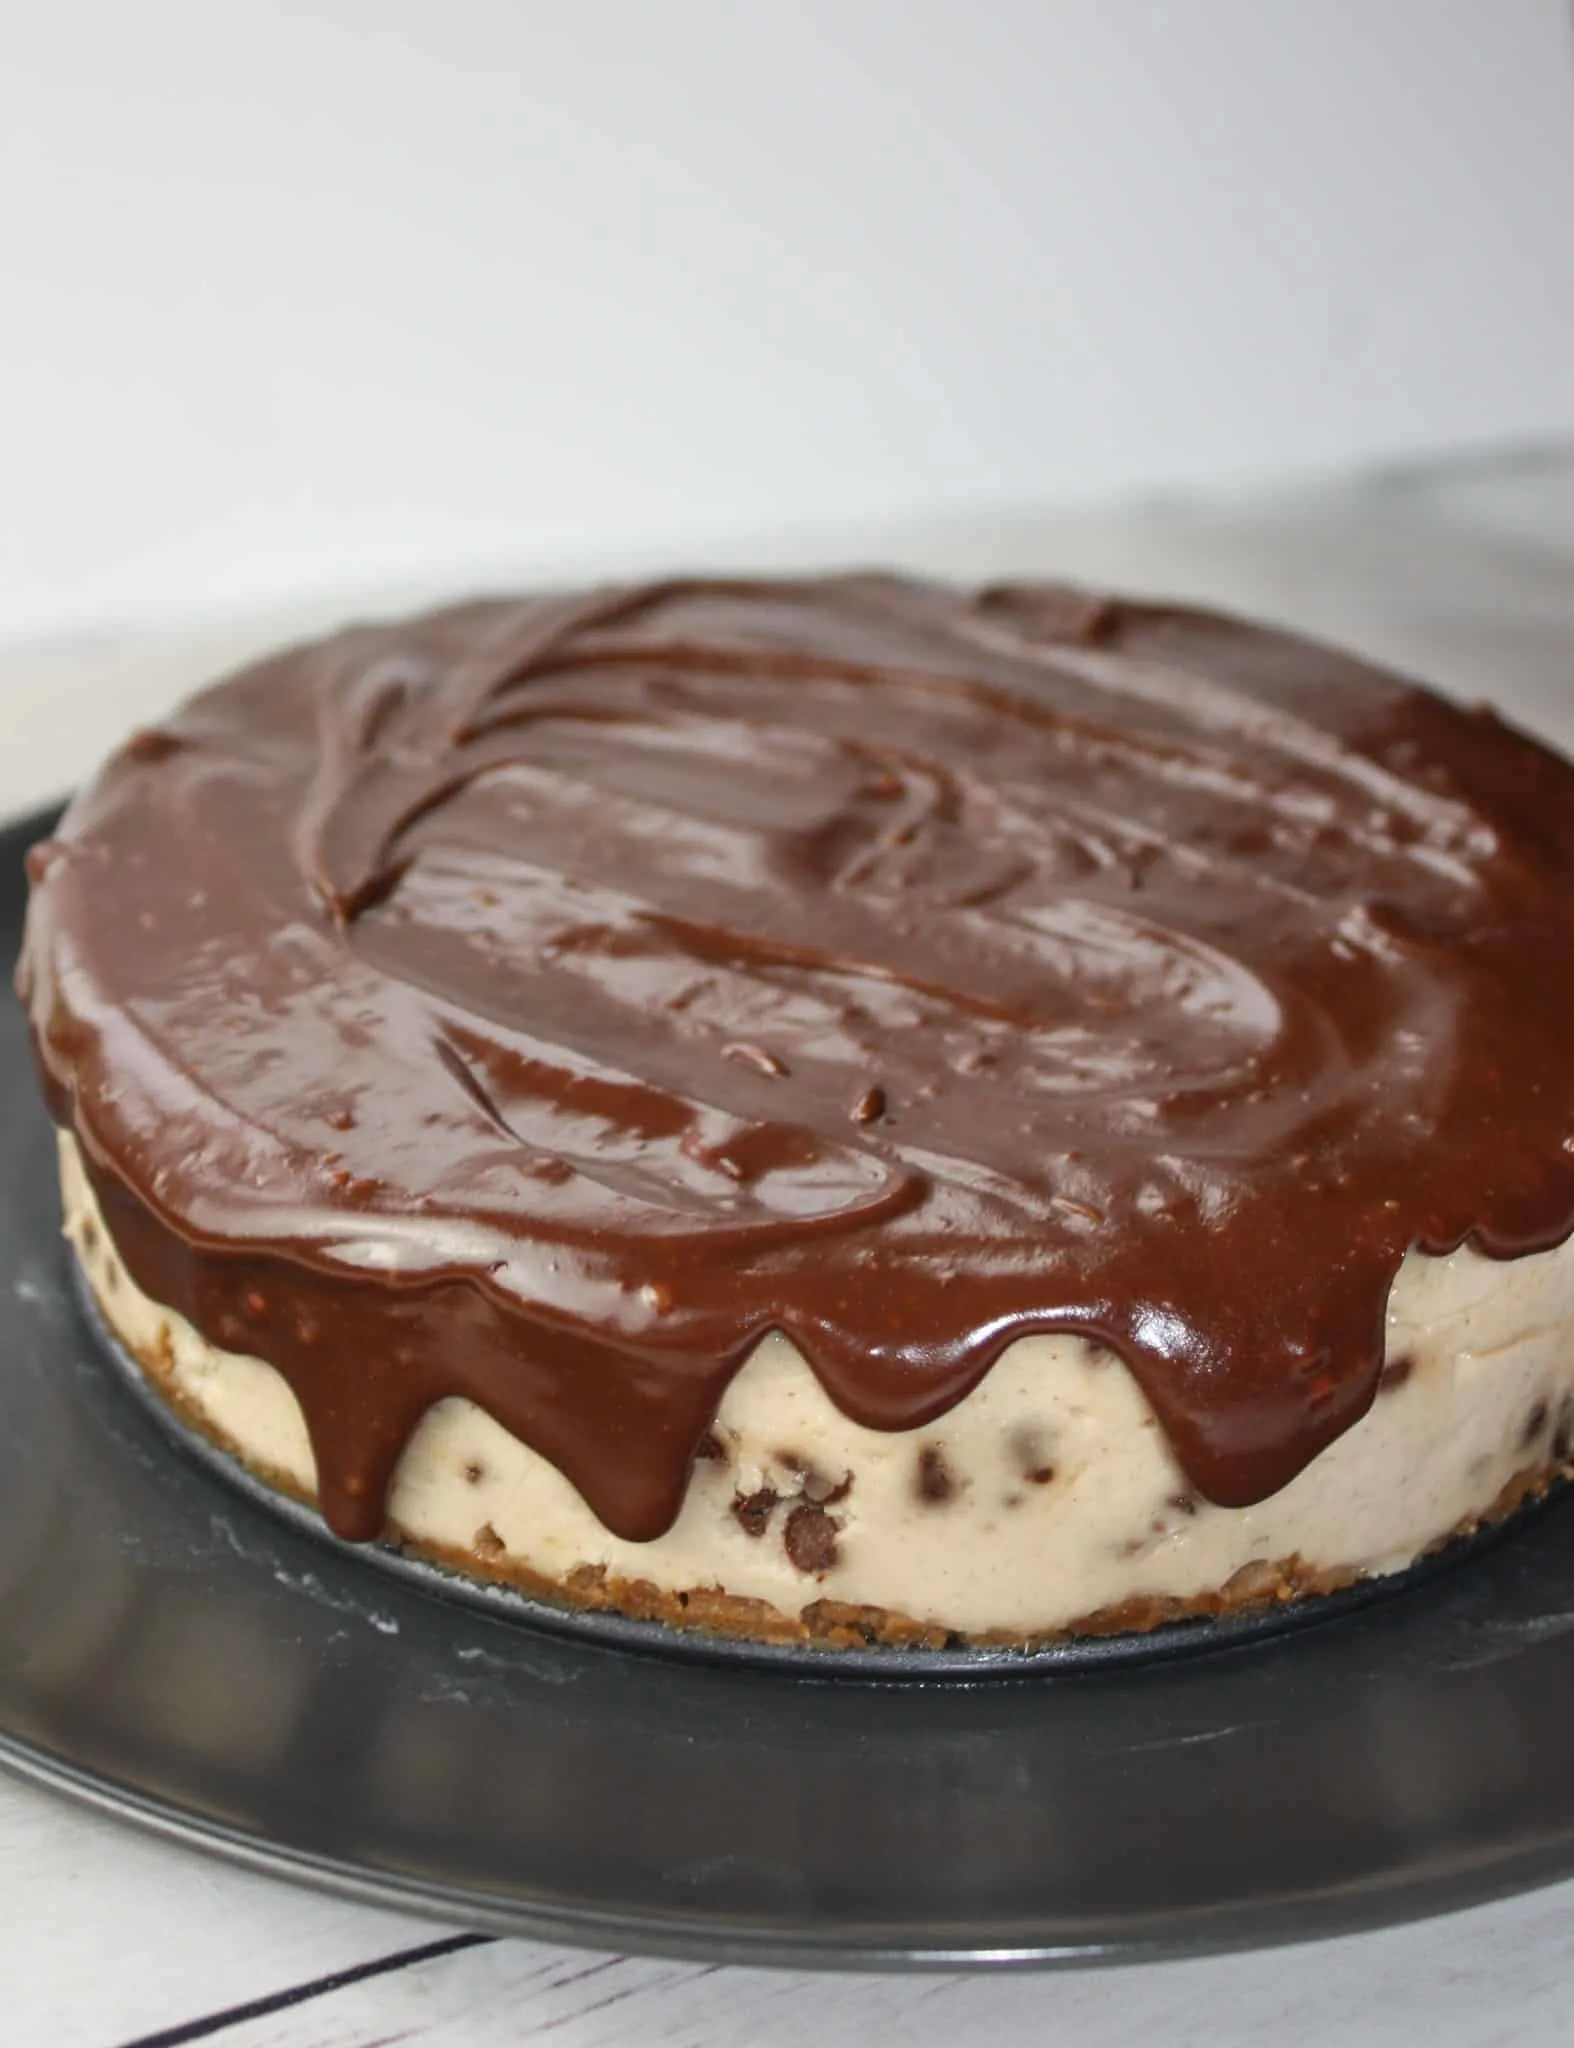 Instant Pot Peanut Butter Chocolate Cheesecake uses my favourite flavour combination. Thanks to the Instant Pot I can easily make a dairy free cheesecake with a gluten free crust!